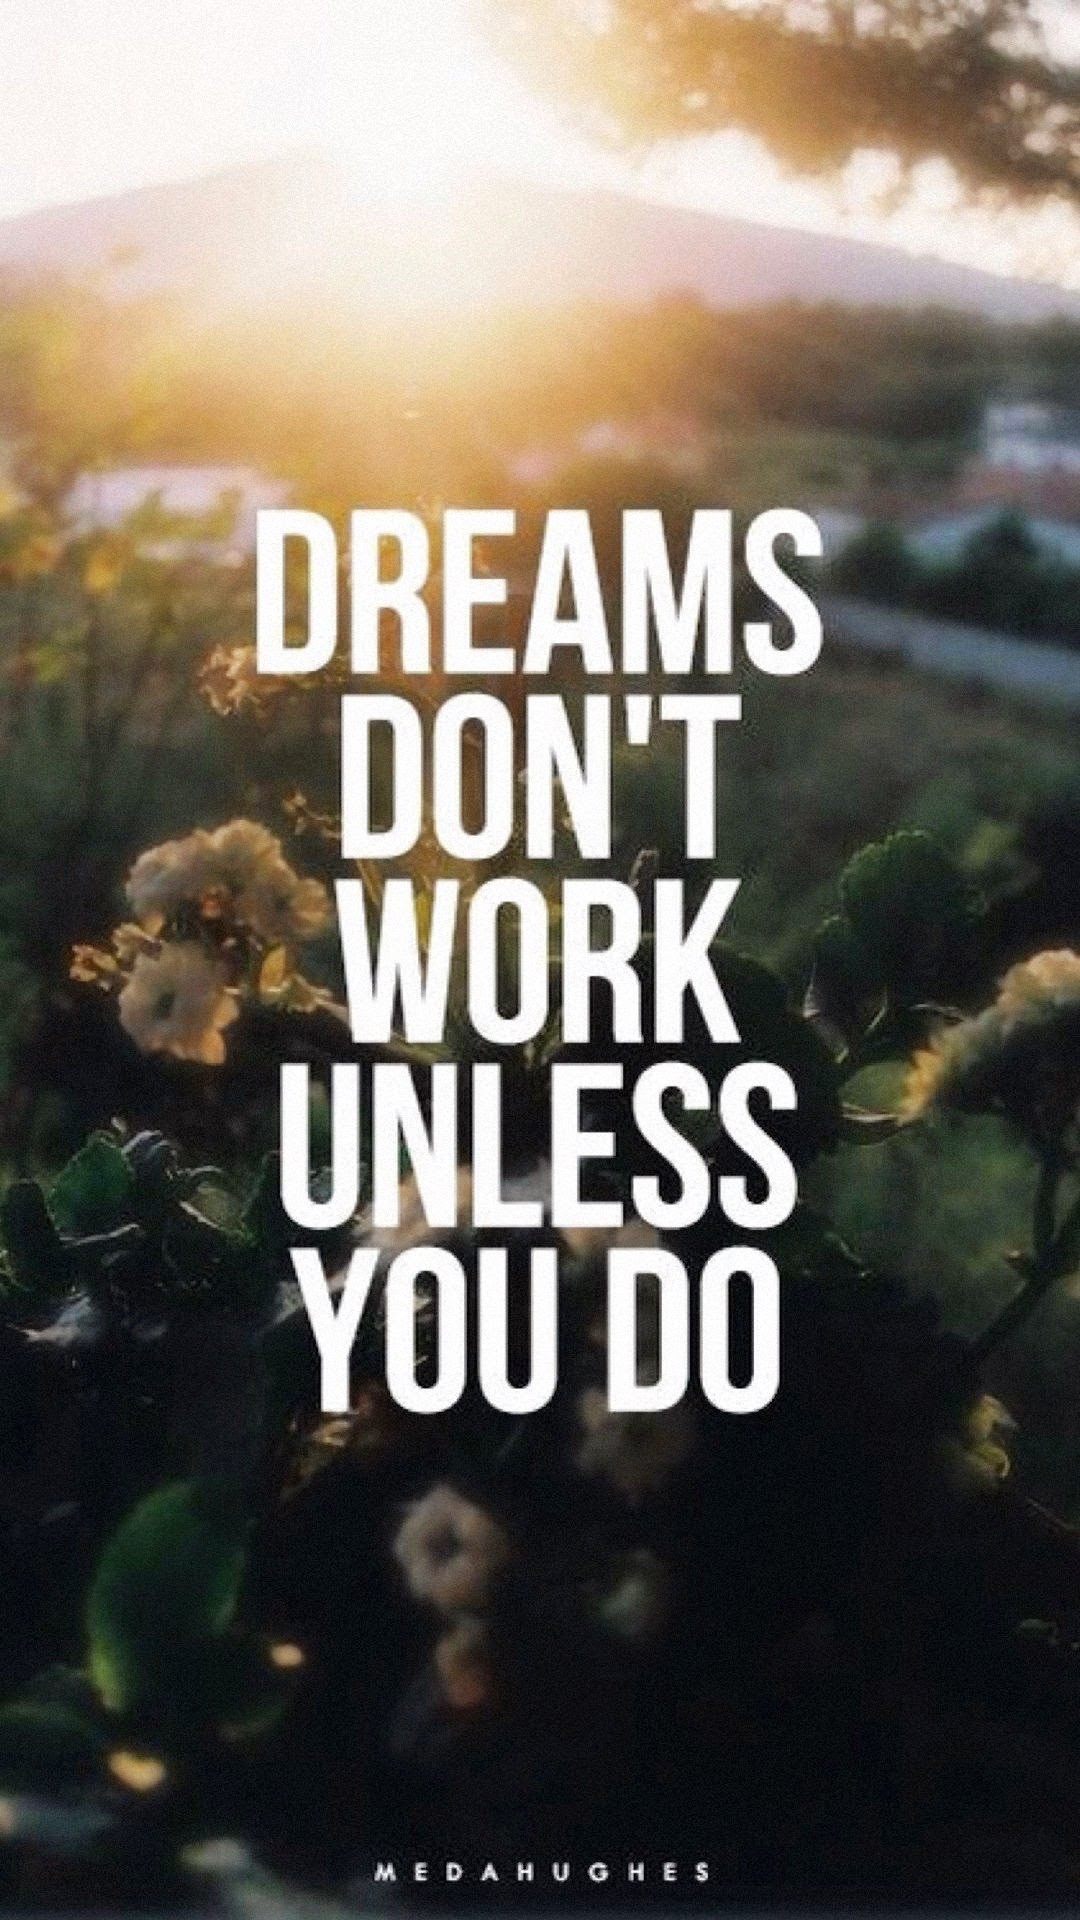 1080x1920 Tap image for more quote wallpapers! Dream Needs Work - @mobile9 | iPhone 6